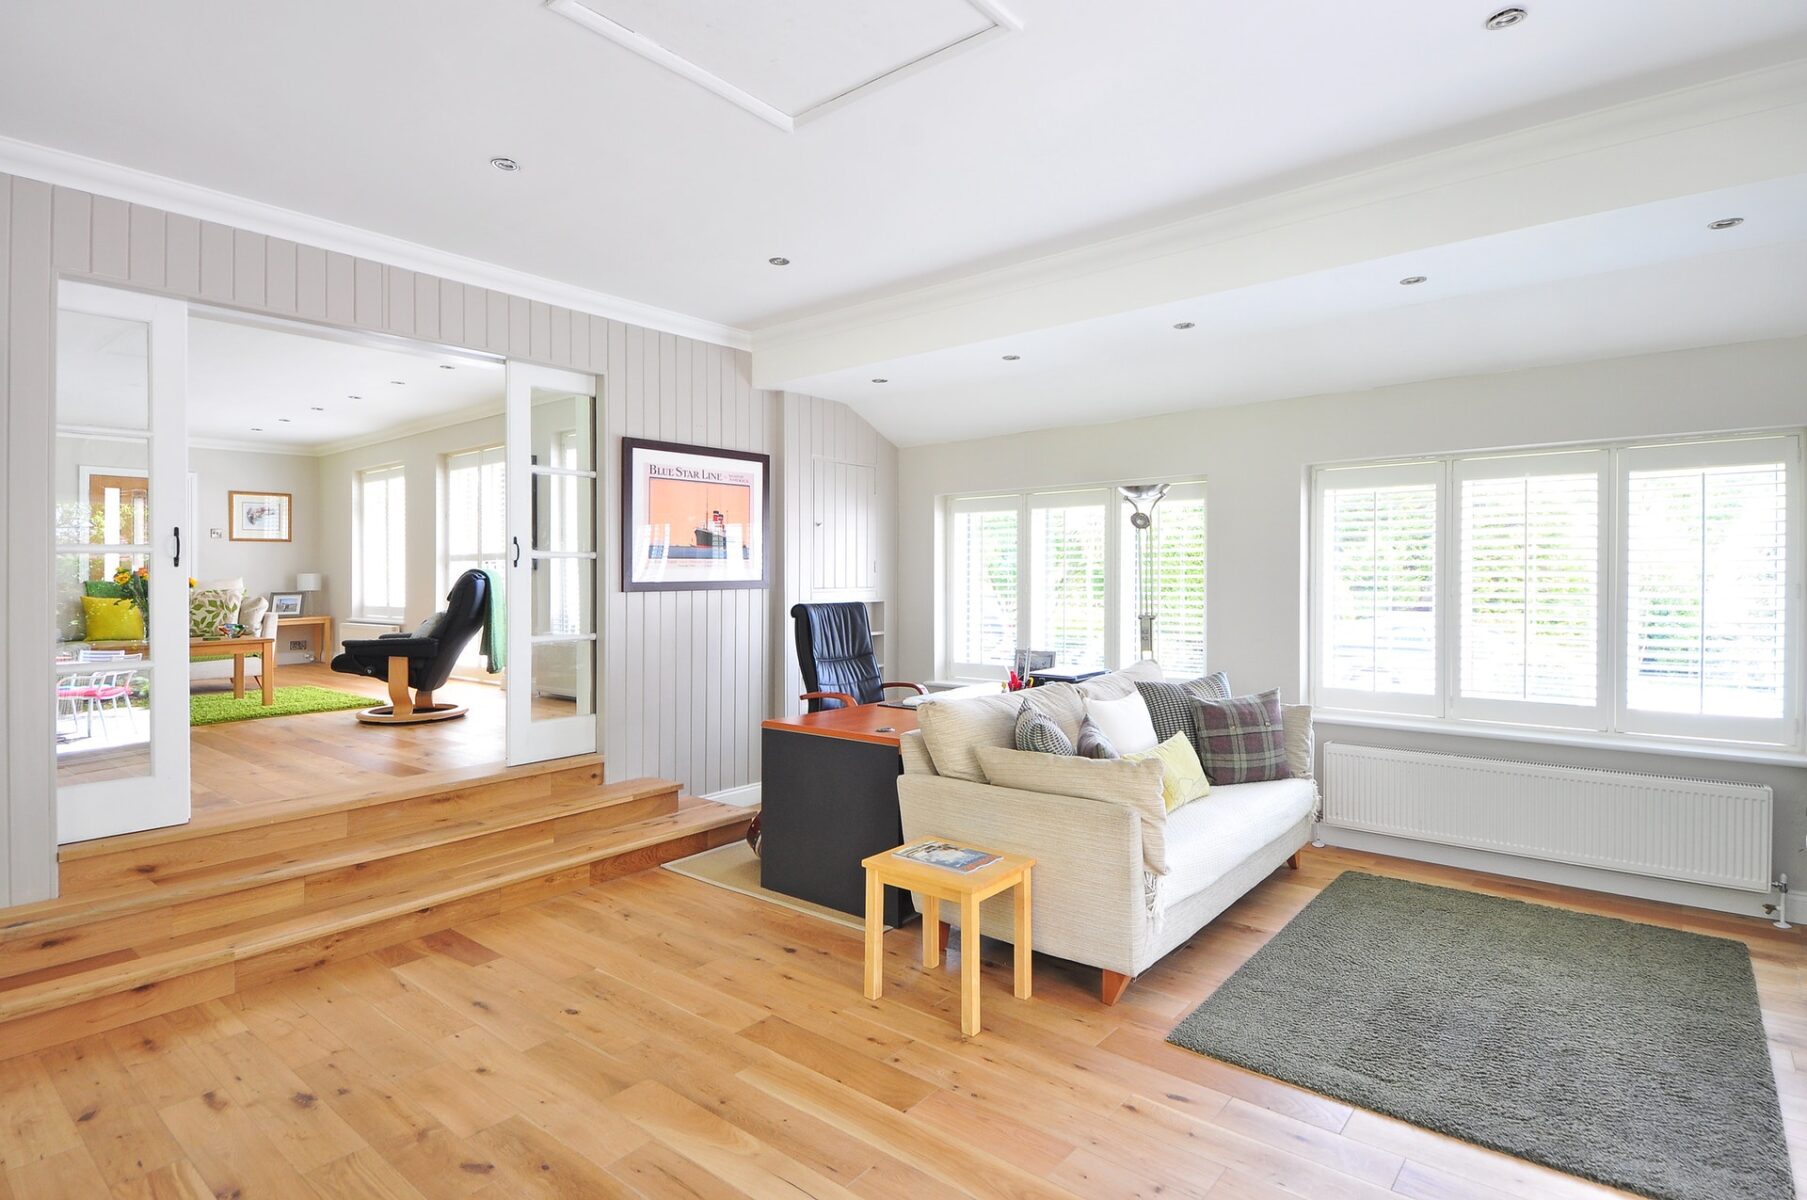 Factors to Consider When Choosing Flooring for Your Home